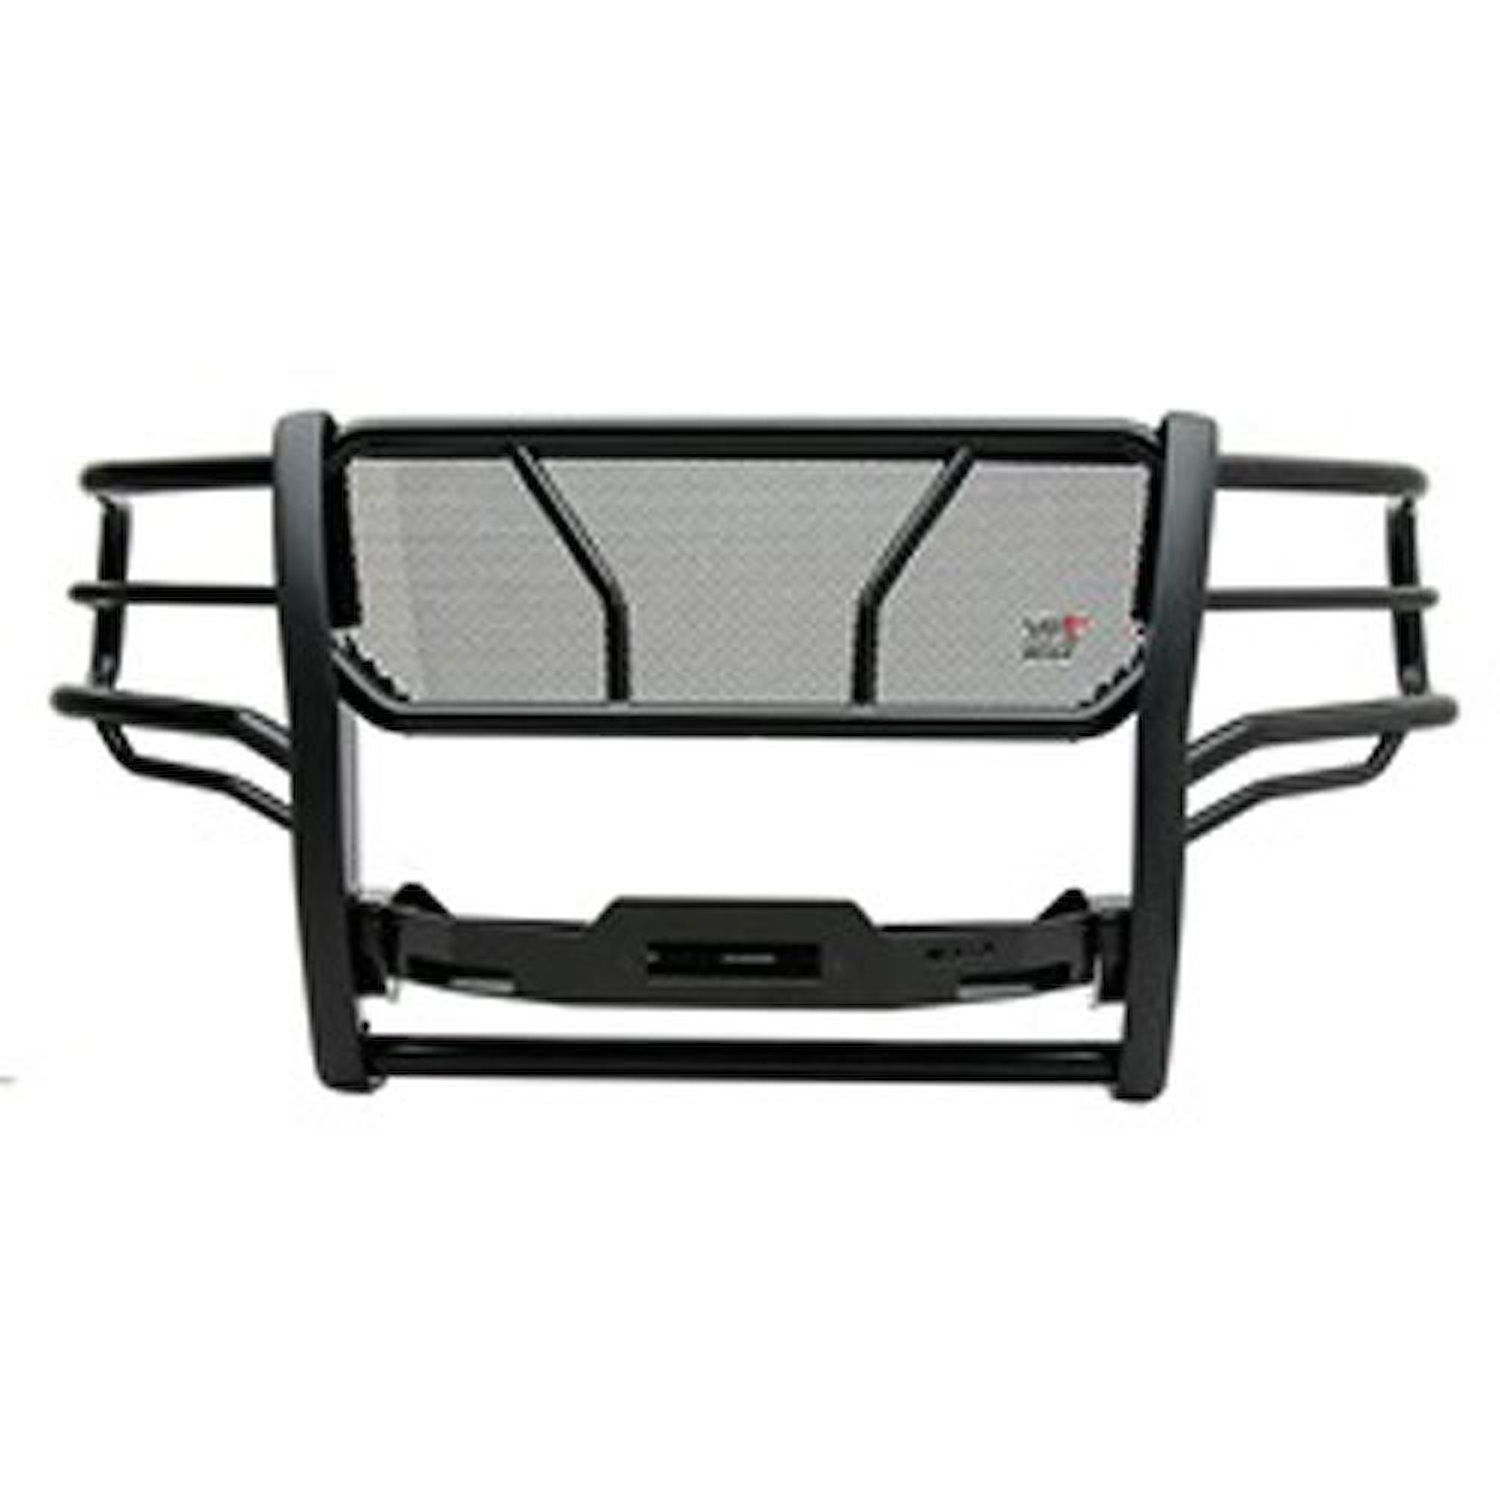 HDX Winch Mount Grille Guard 2014-16 Toyota Tundra